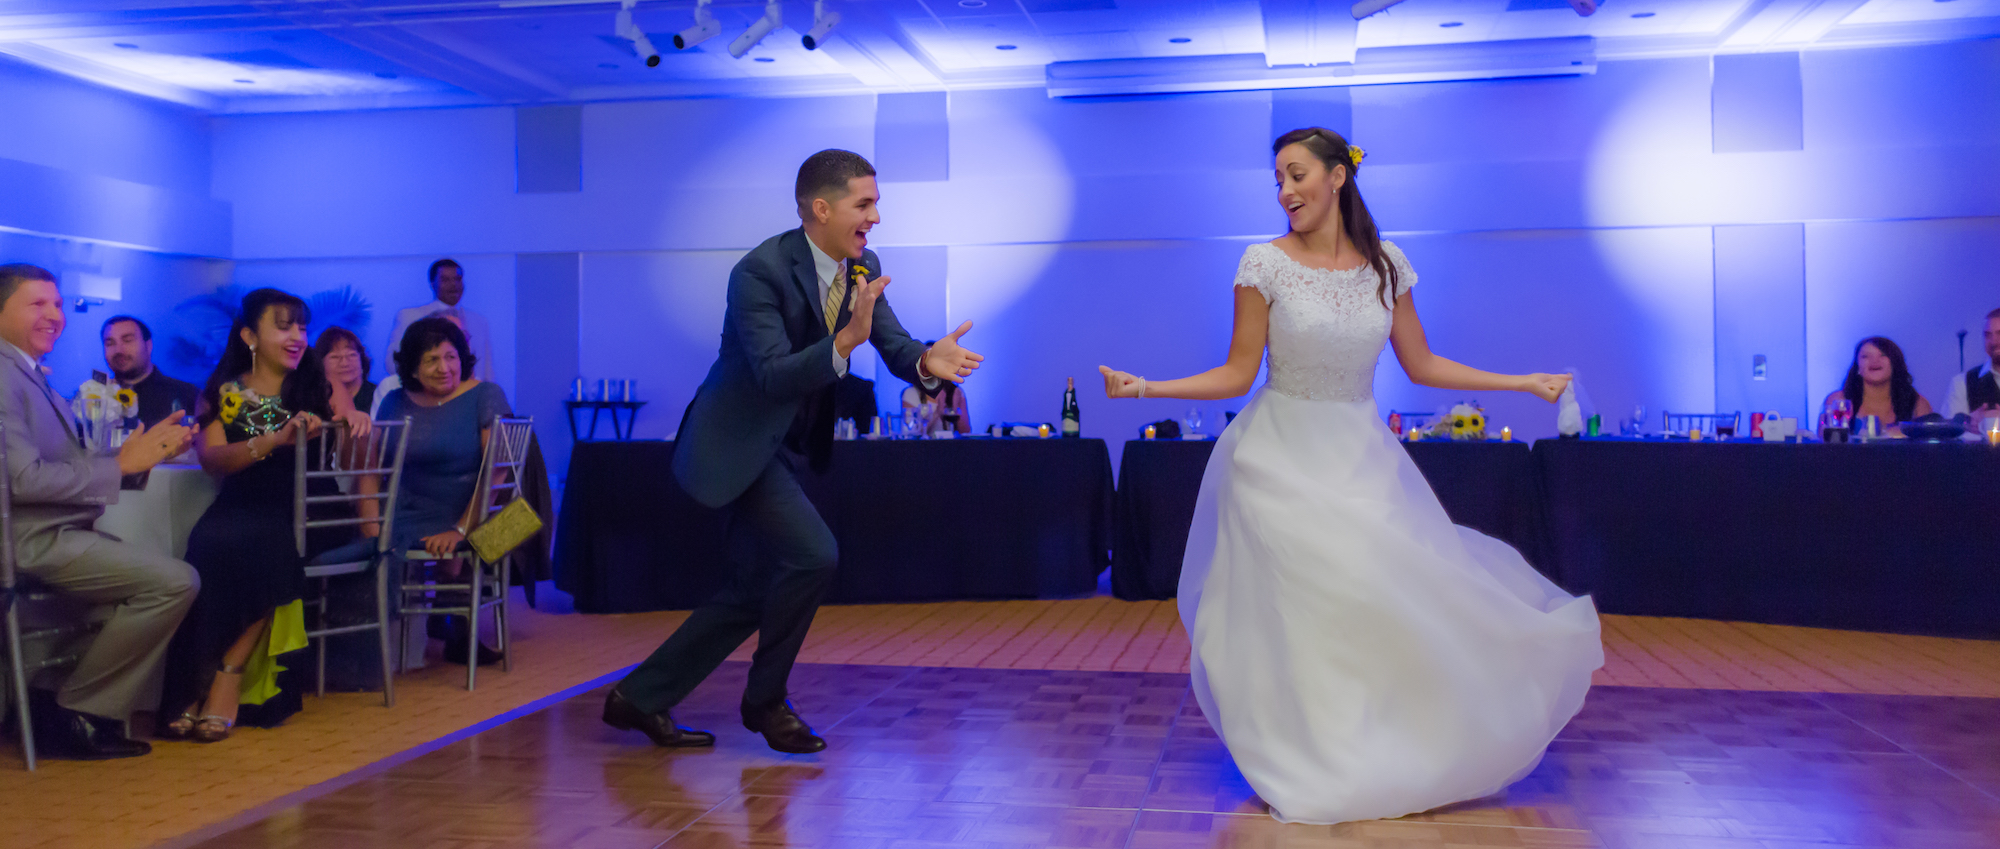 Miami Wedding Photographer Bride and groom dancing during the wedding reception by Alfredo Valentine Couture Bridal Photography Alfredo Valentine